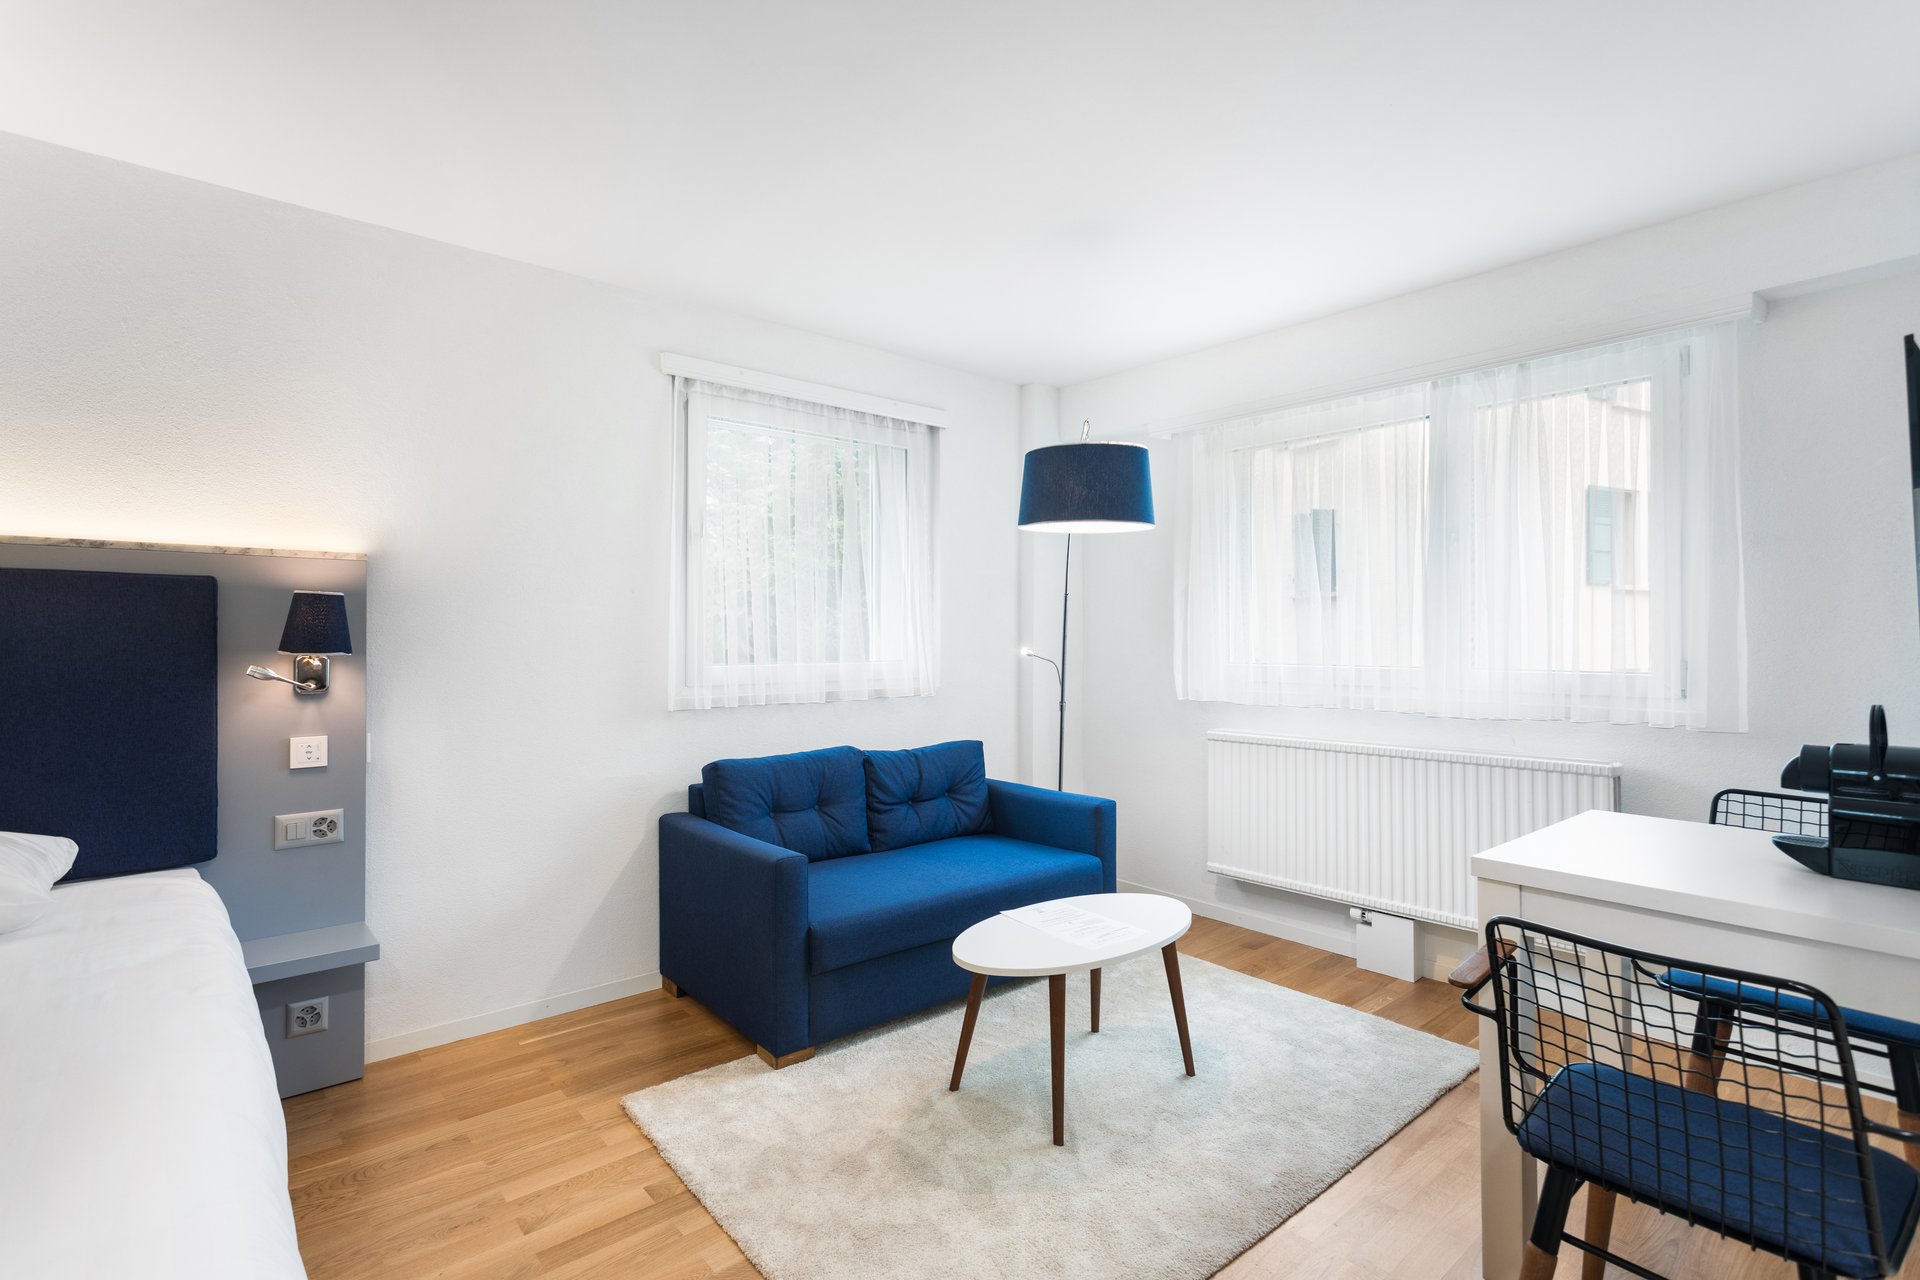 Pleasant studio apartment equipped and furnished, practical and modern in a newly renovated building in compliance with envir